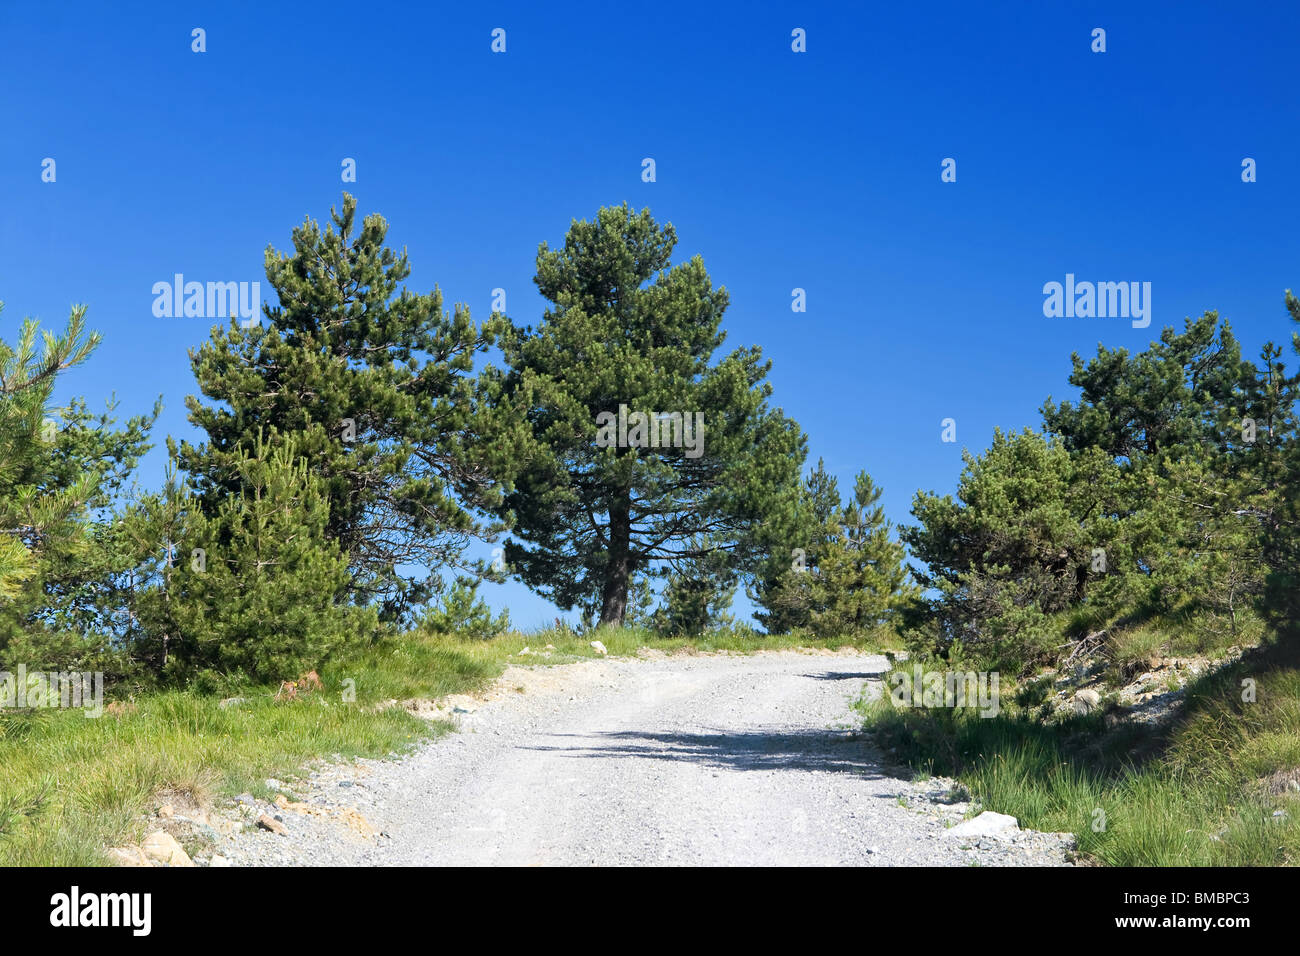 Dirty mountain road under bright blue sky with plants and trees Stock Photo